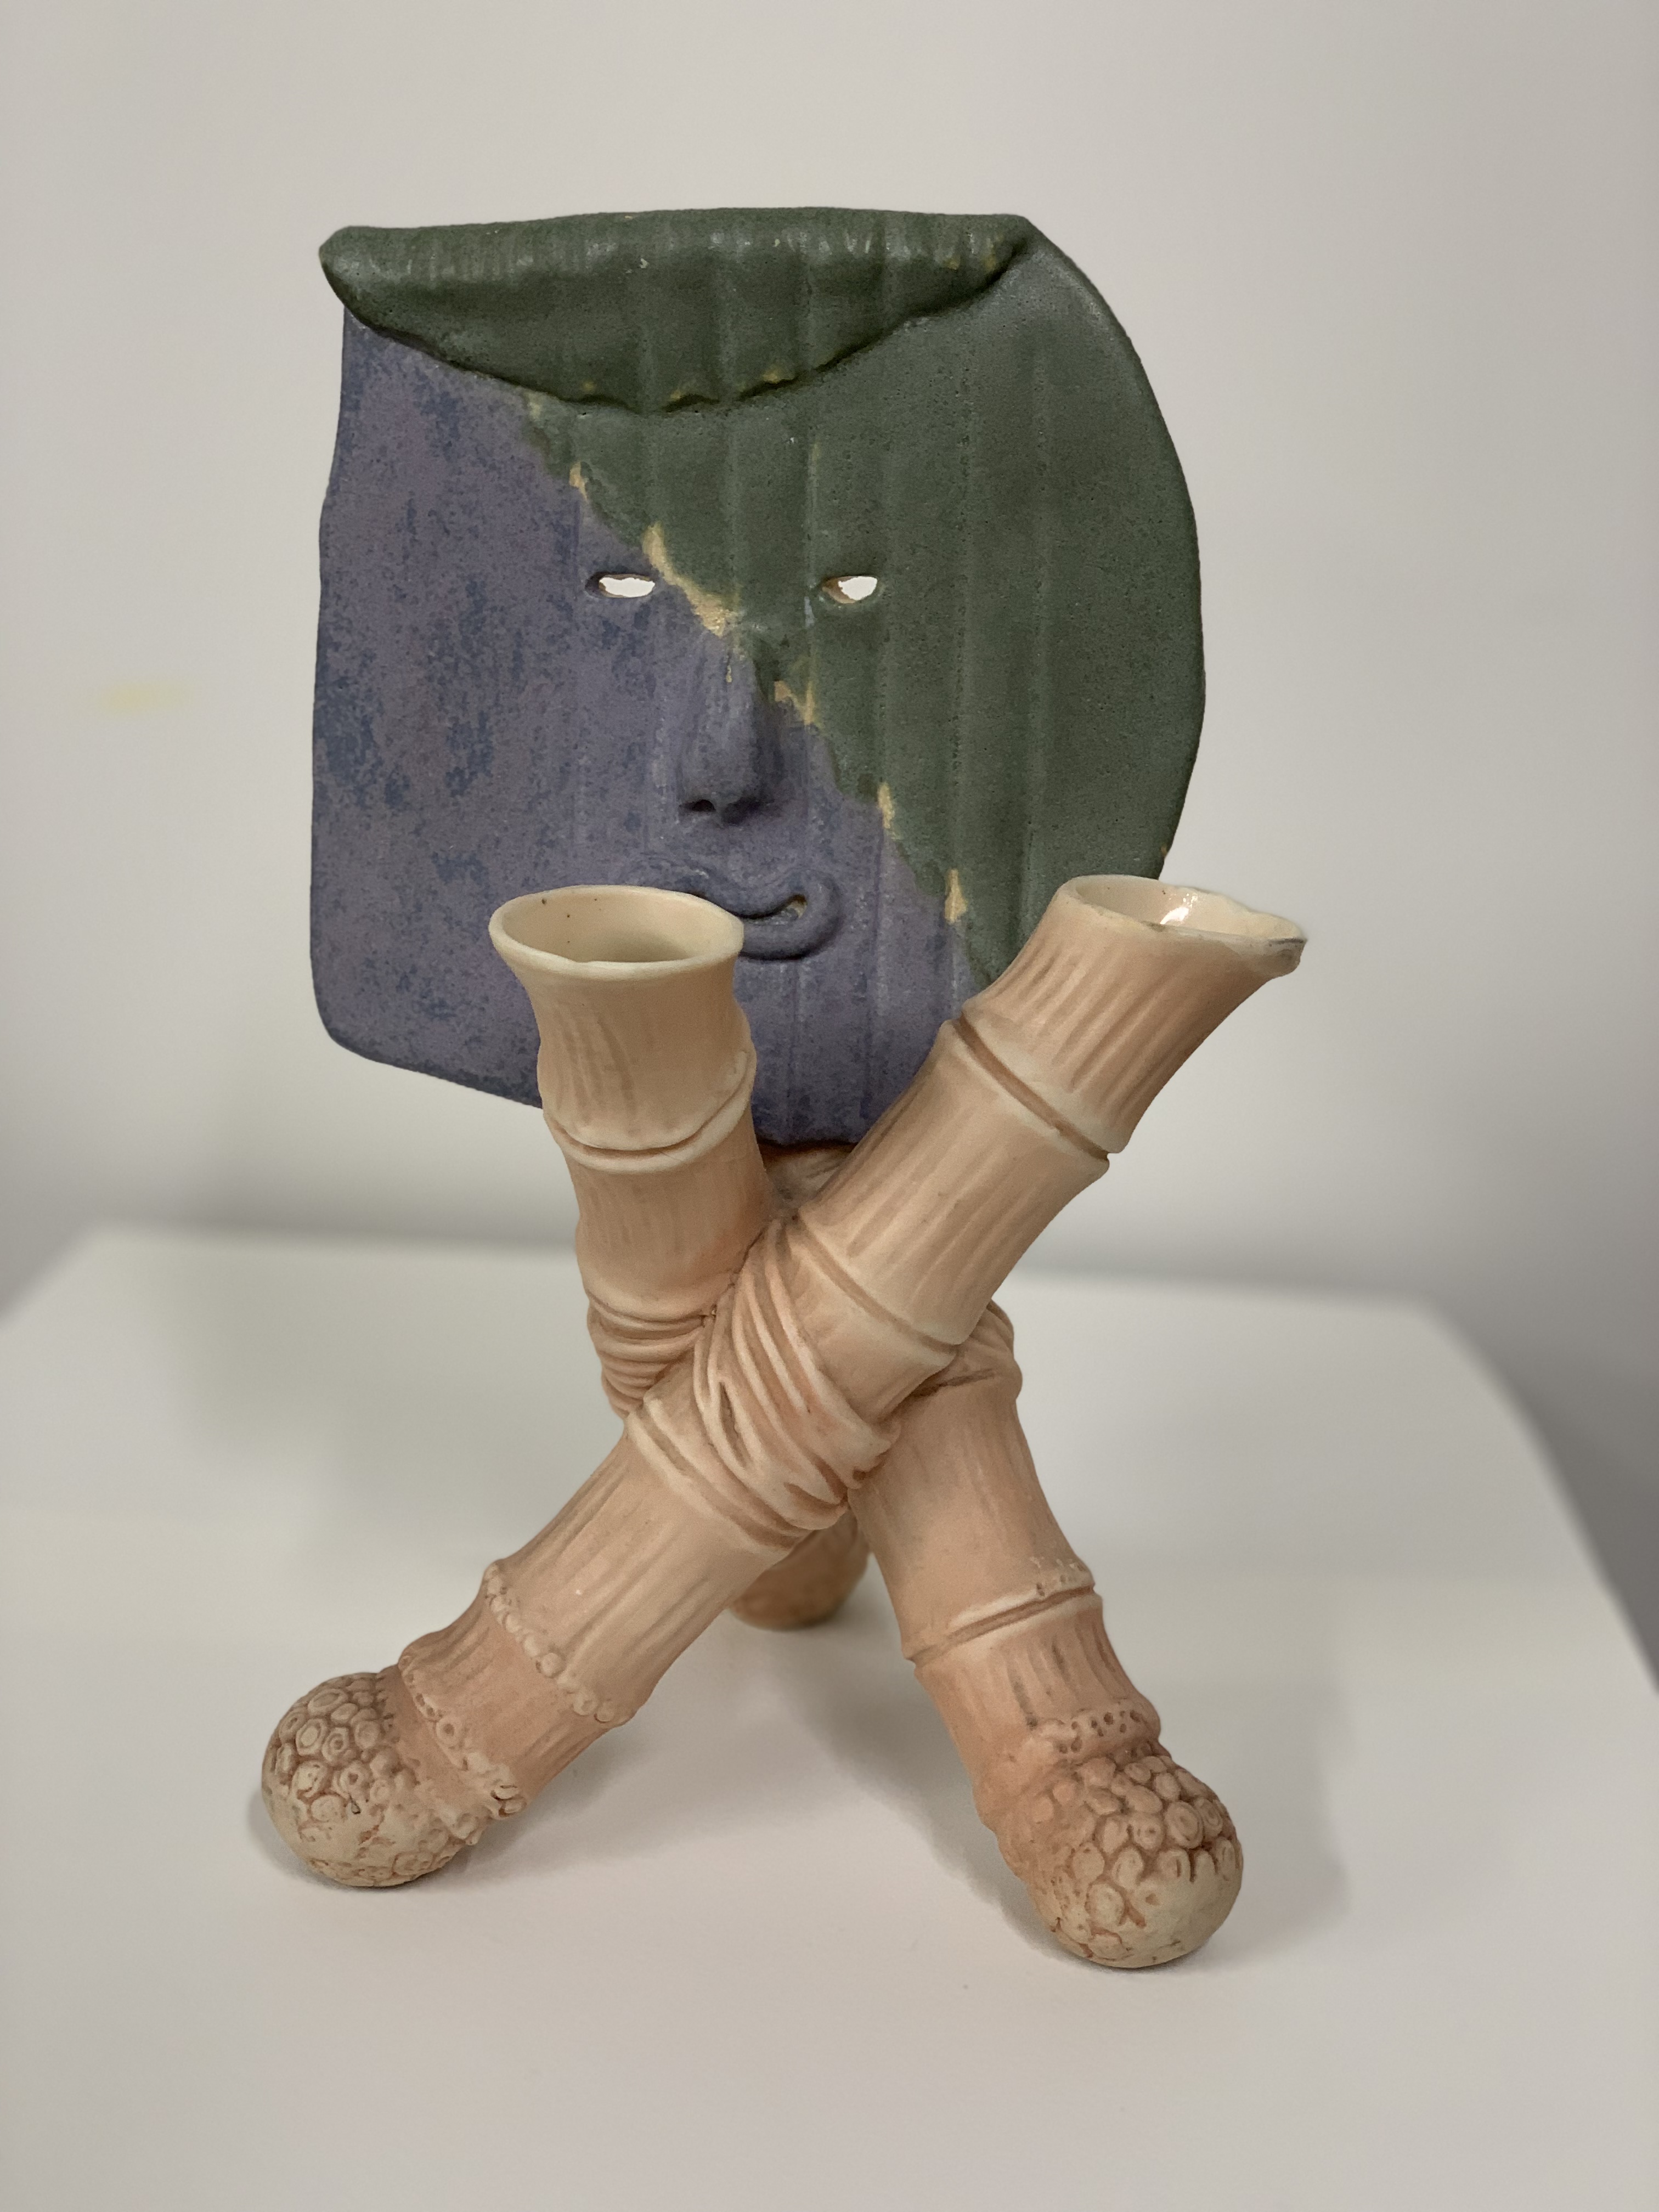 Sculpture by Rachel Walters in glazed stoneware and found ceramic not titled